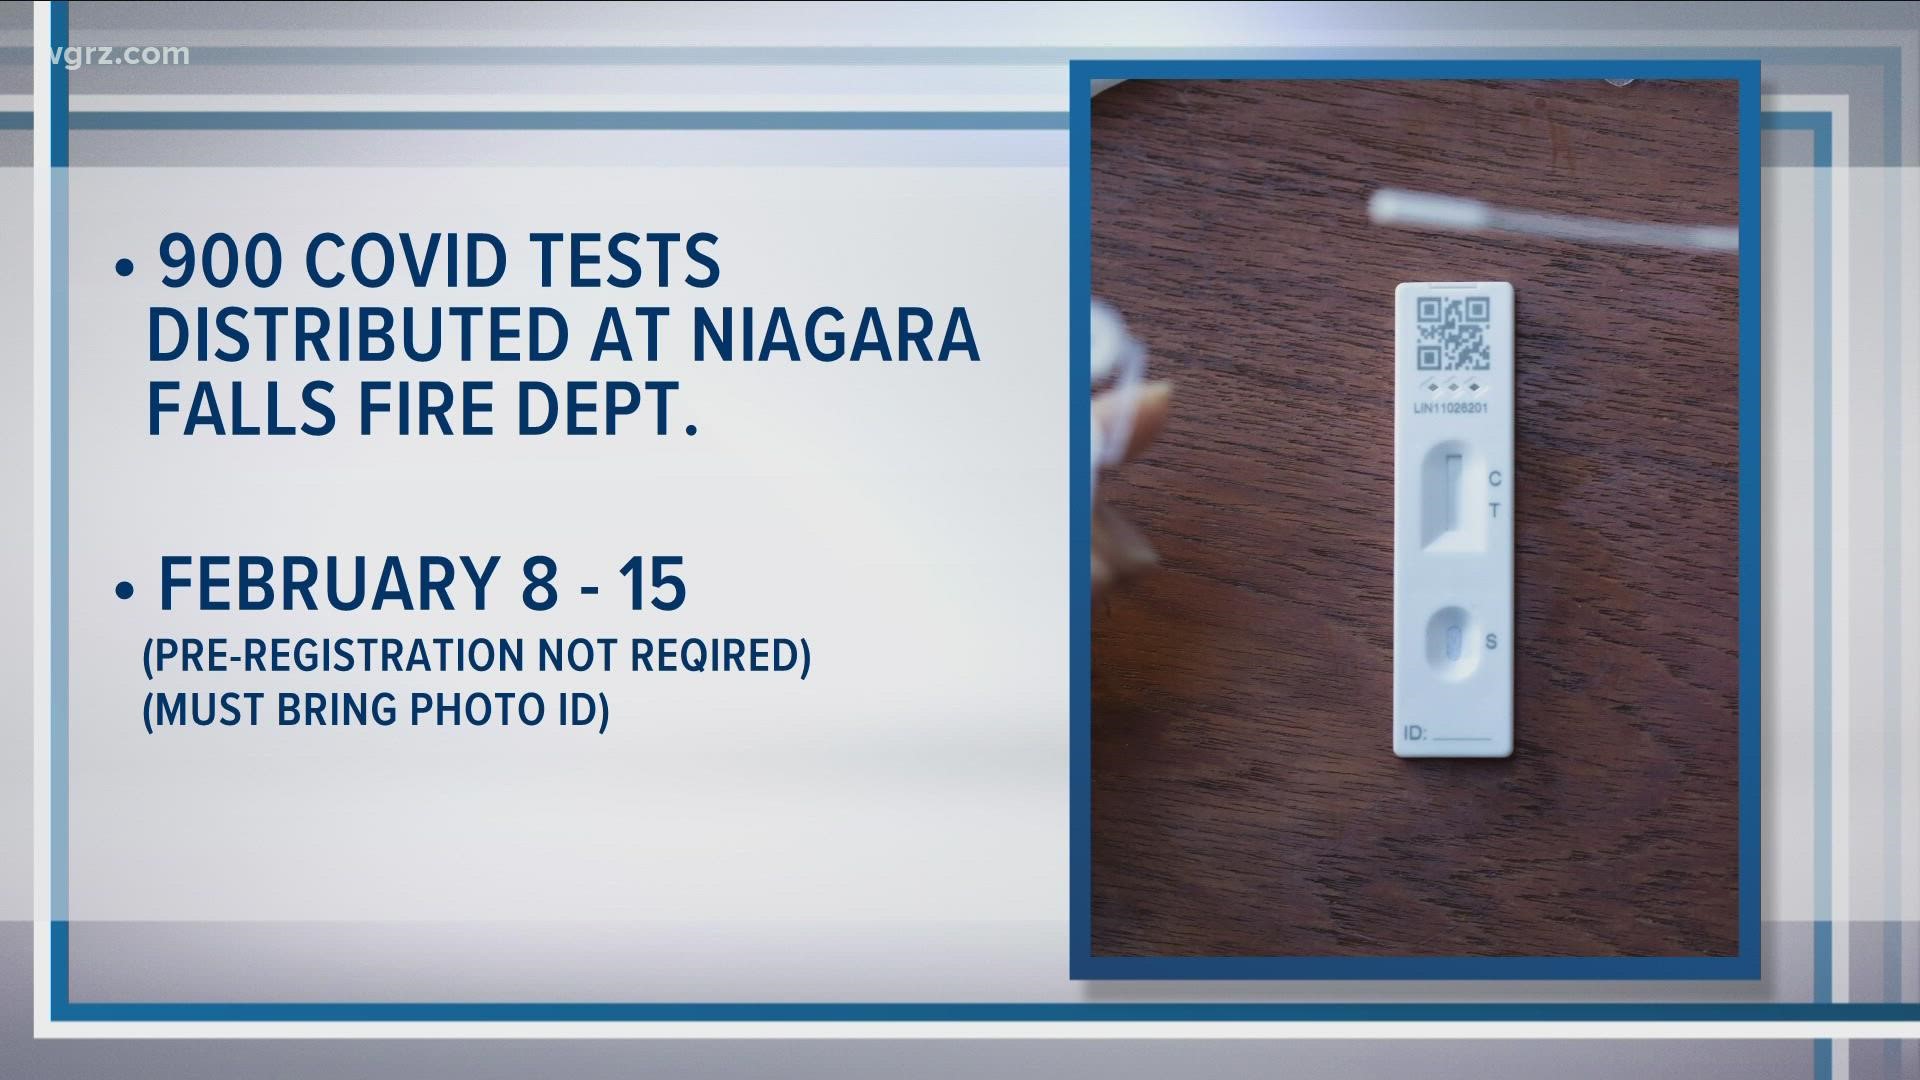 The city of Niagara falls will be distributing 900 at-home COVID tests to residents next month.